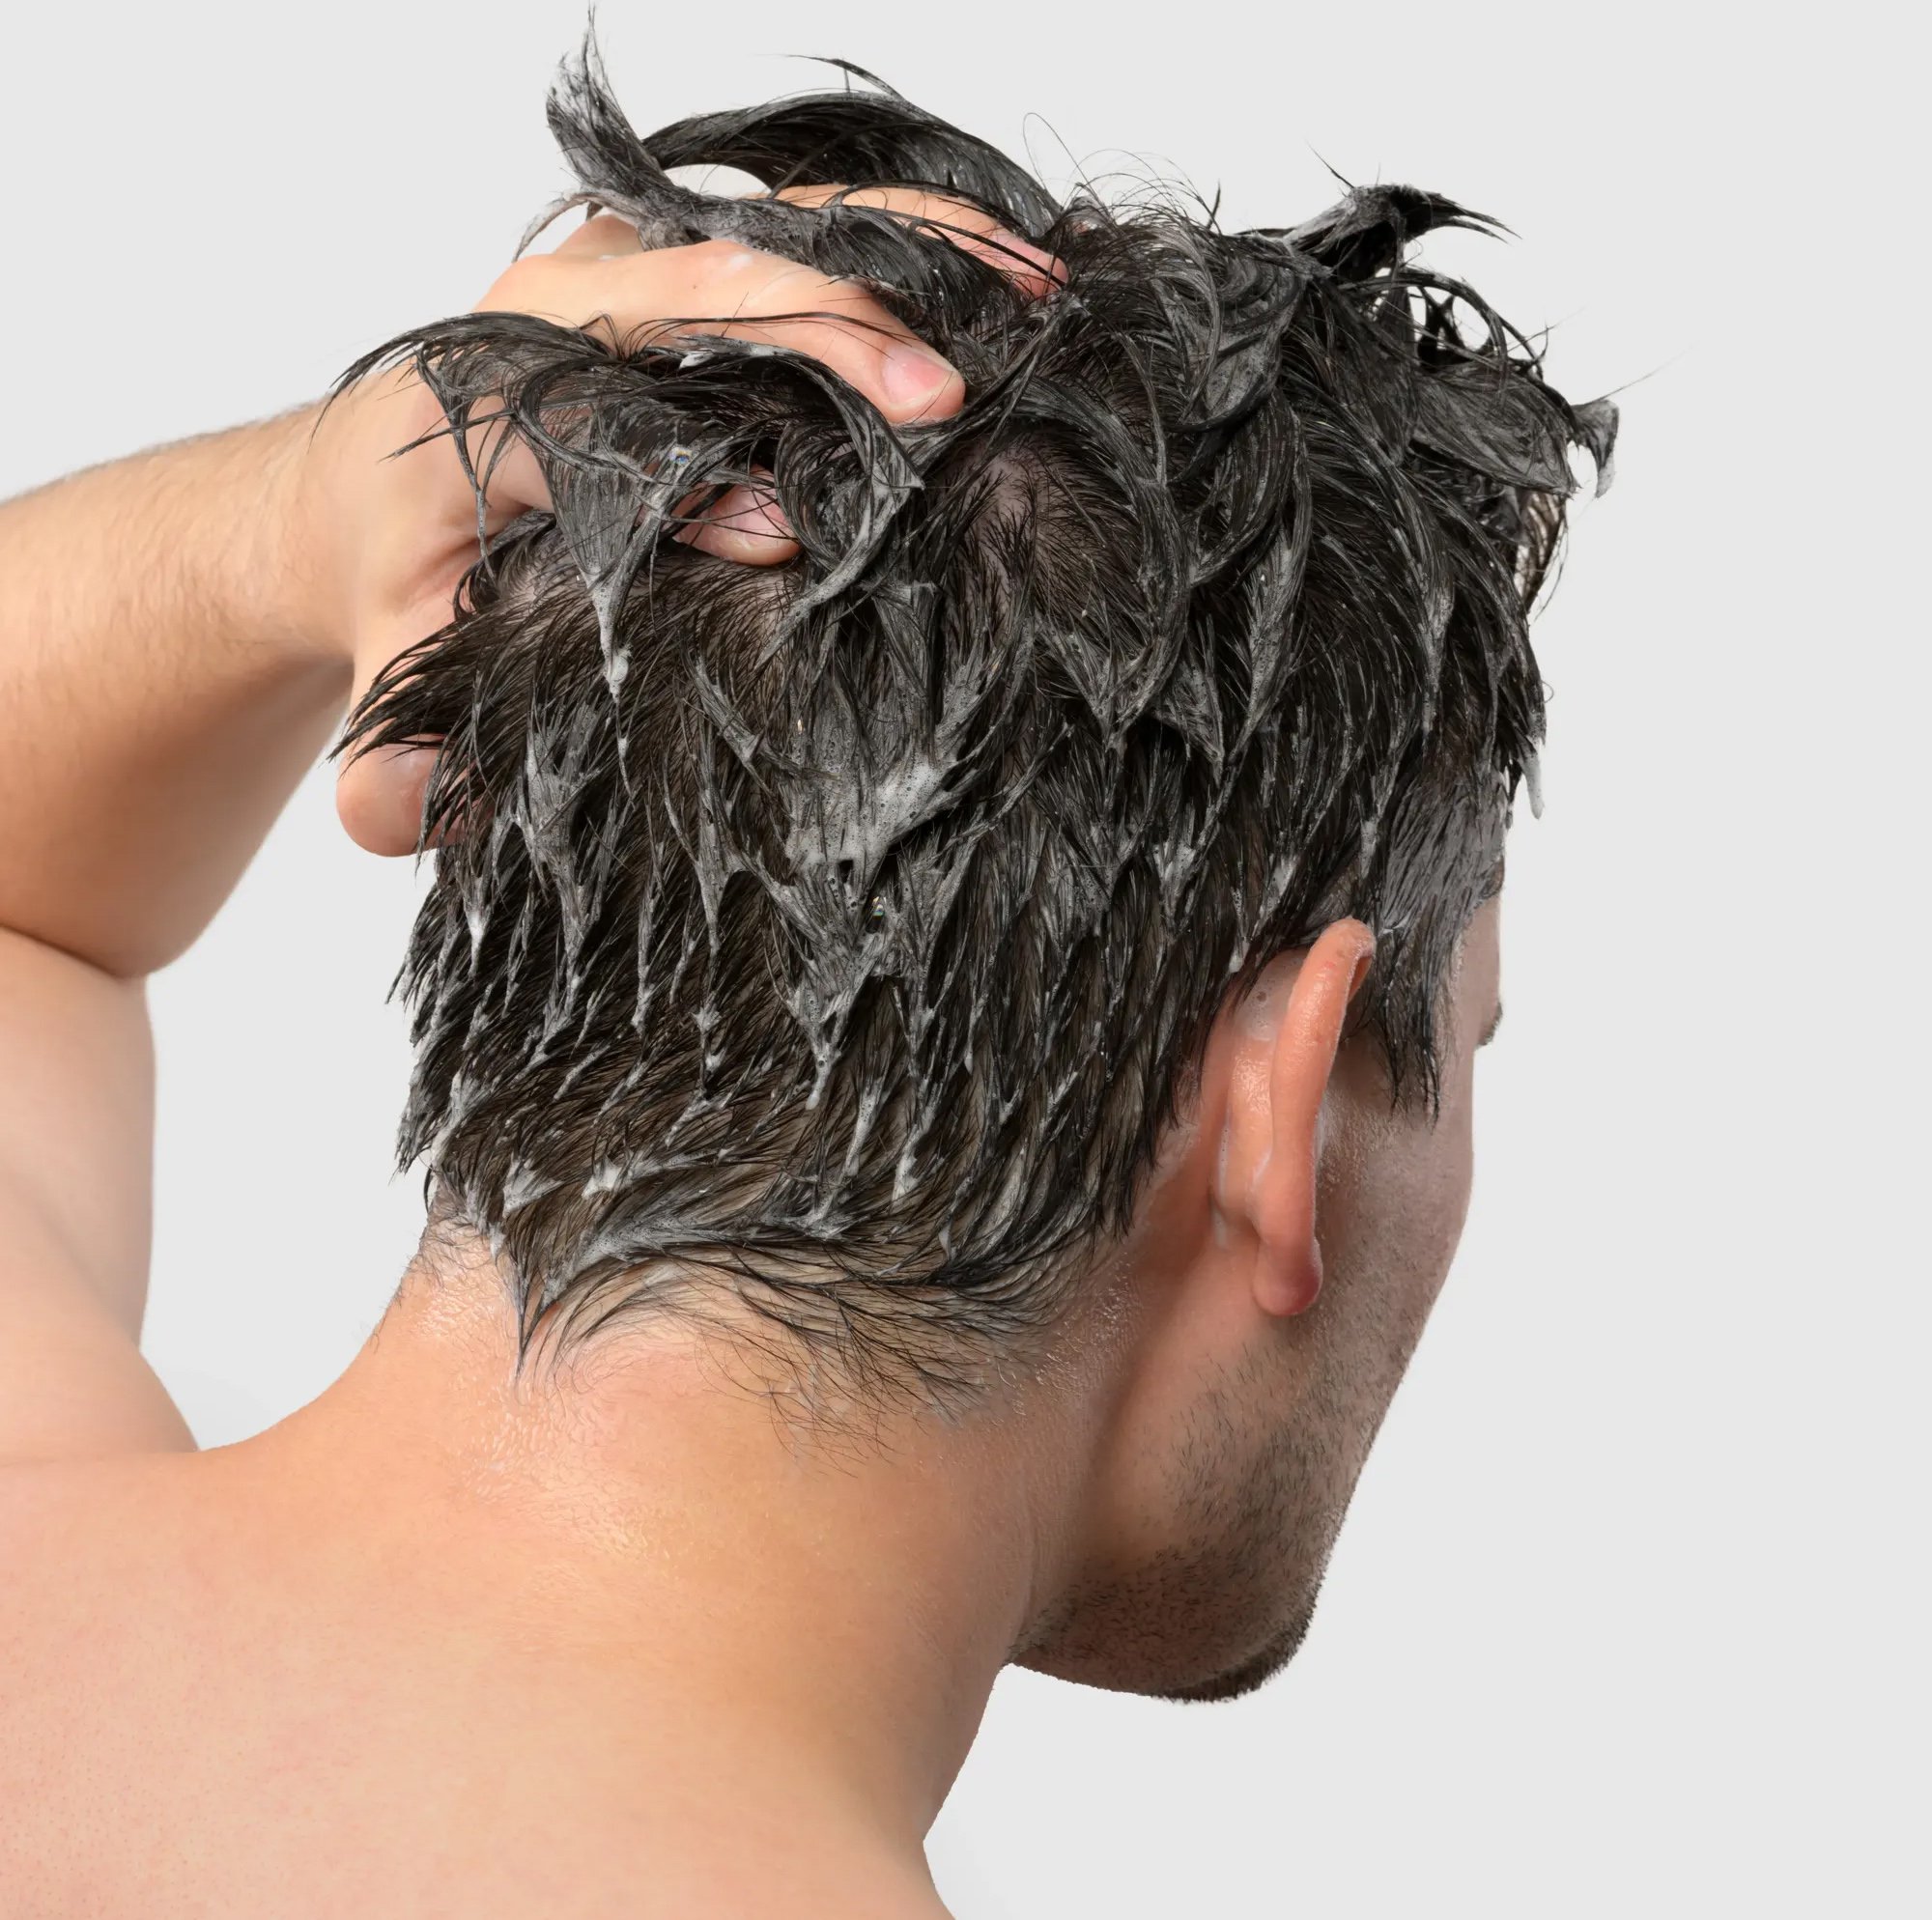 Reduce your levels of Dihydrotestosterone (DHT) in the scalp with a specially formulated daily shampoo that is designed to block the effects of this hormone